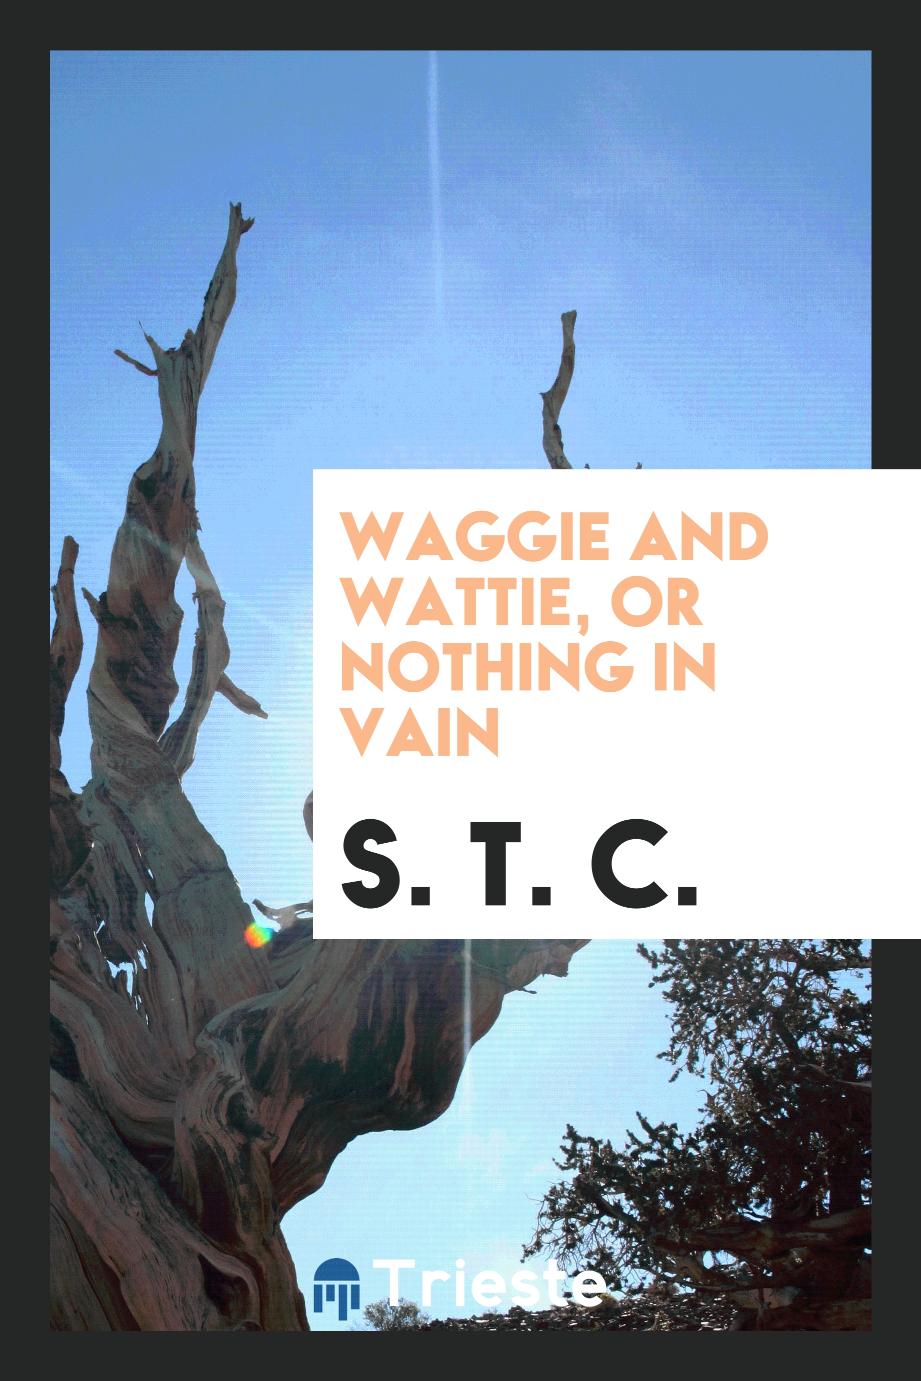 Waggie and Wattie, or Nothing in Vain